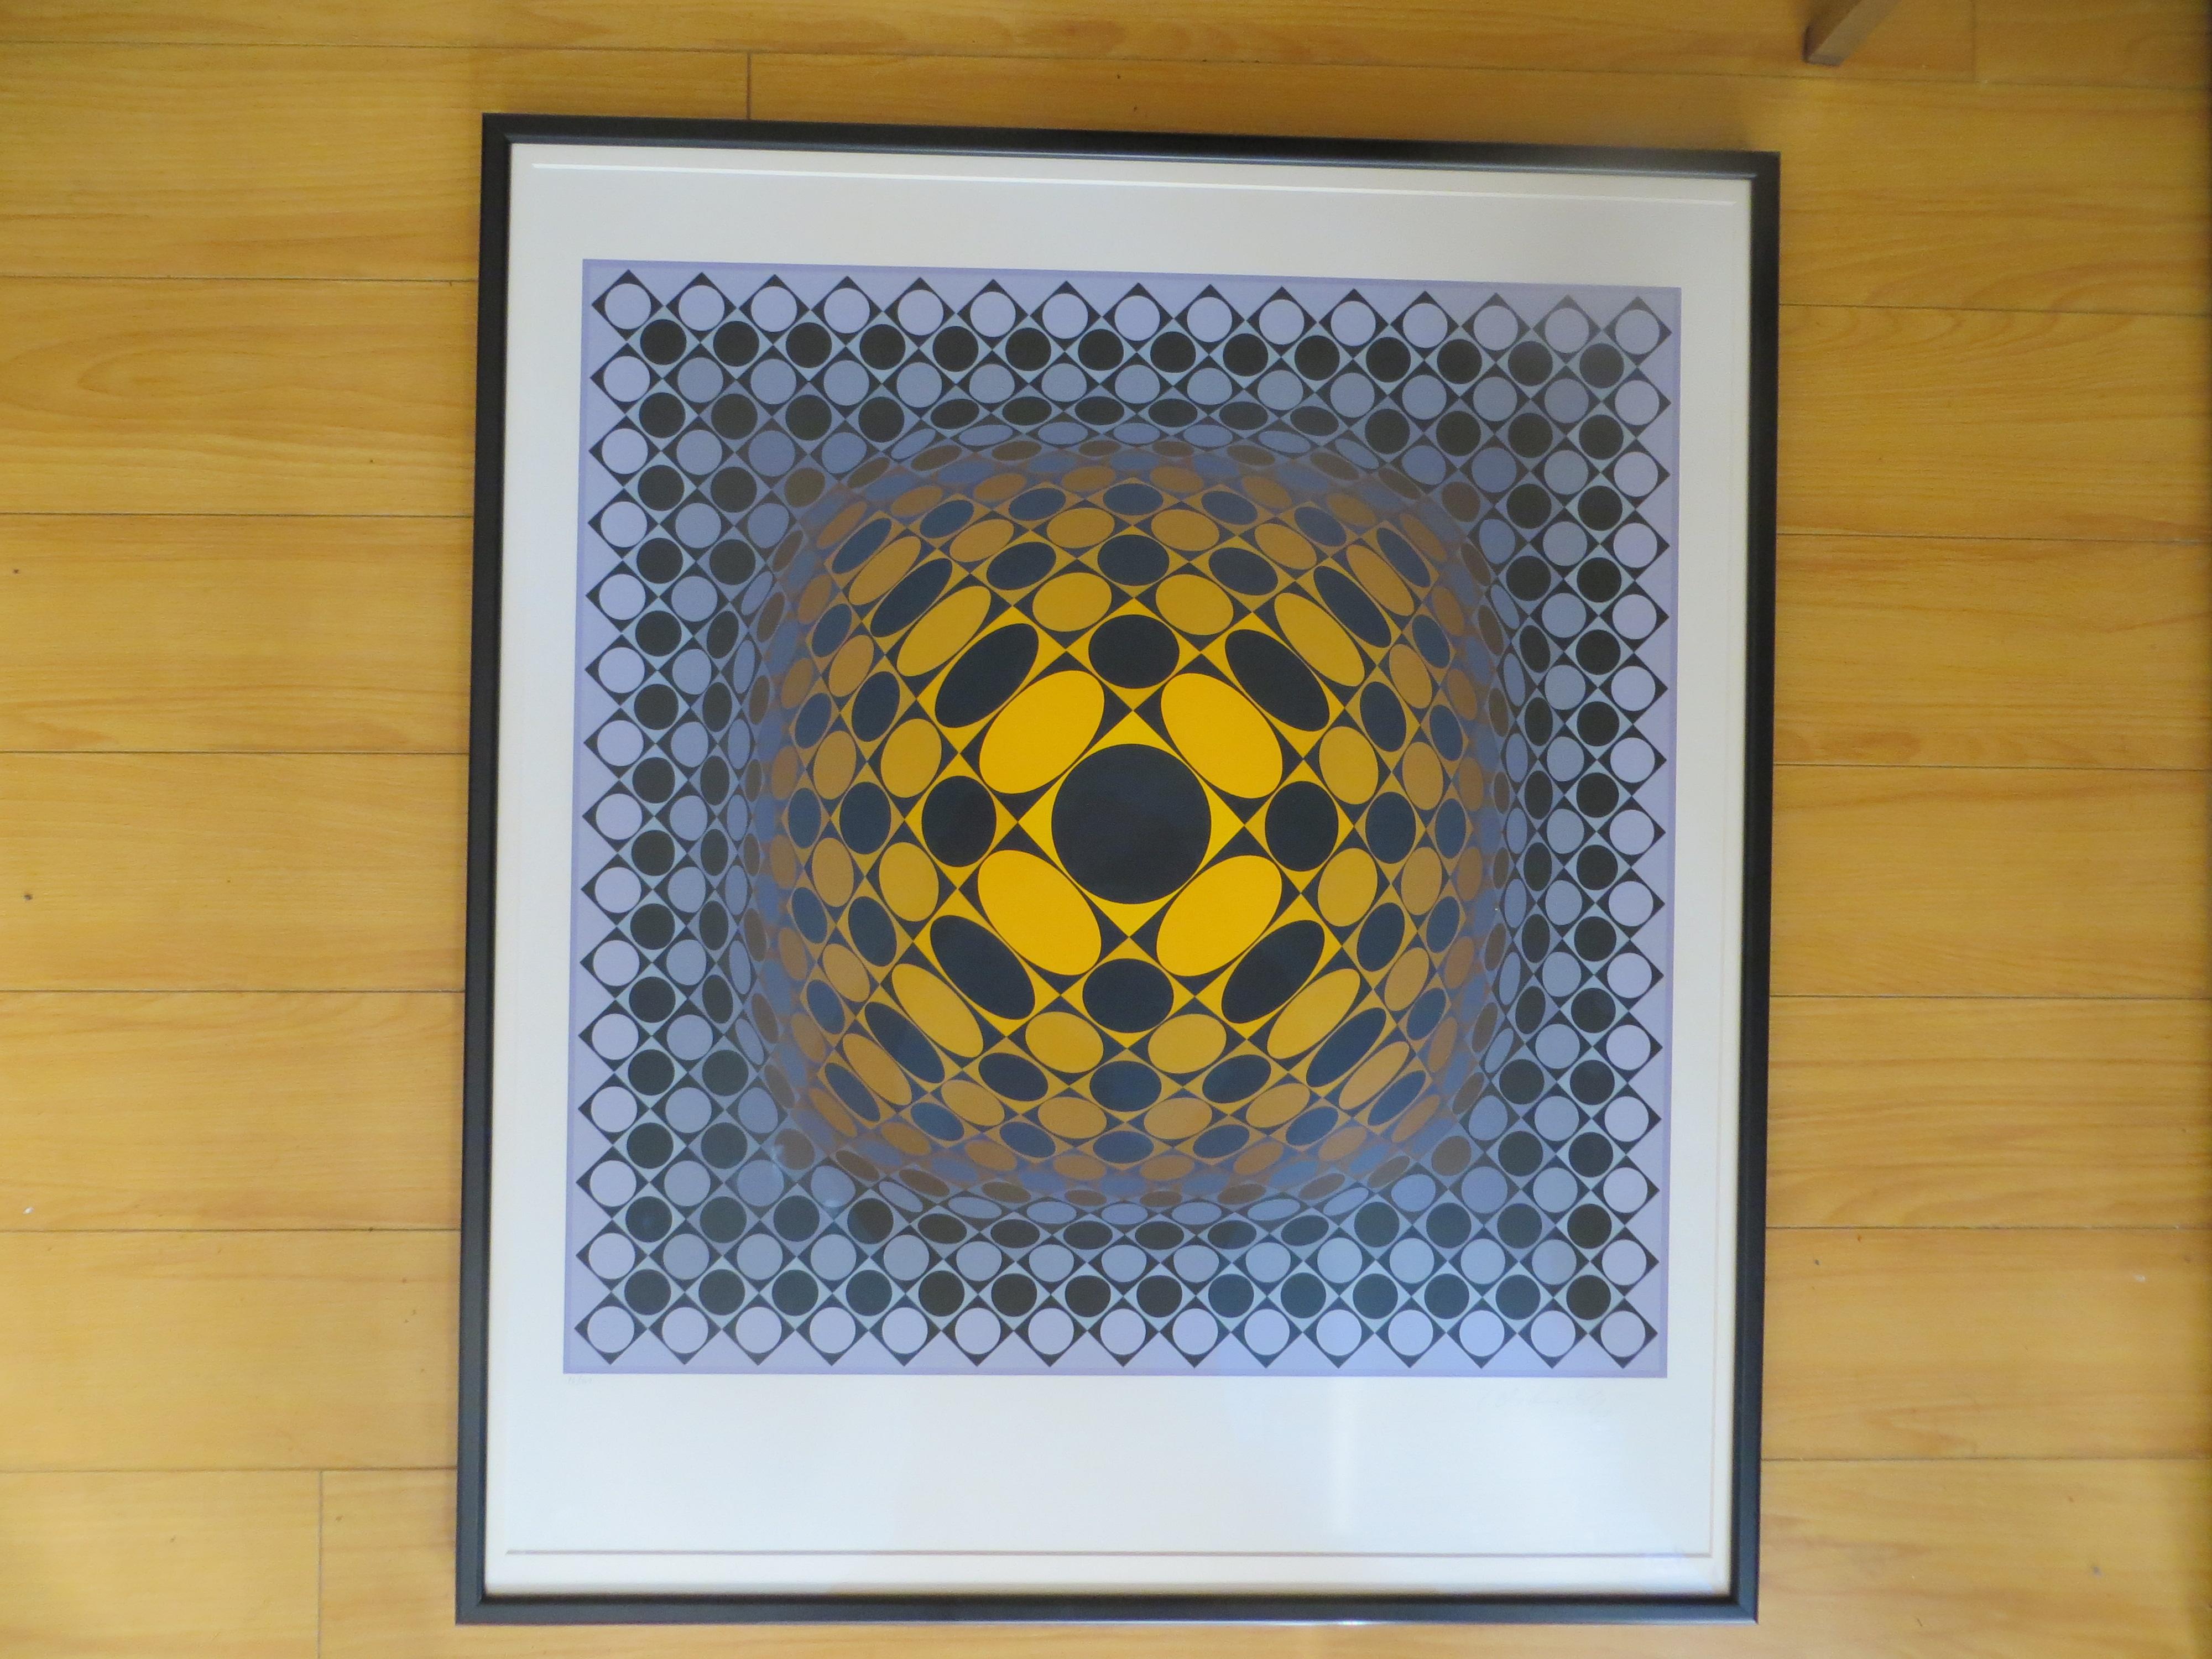 Composition Ionau, Op Art print by Victor Vasarely
1987 .This bright and psychedelic lithograph by Vasarely .It features a signature and dedication in pencil by the artist Screenprint, signed and dedicated in pencil
Edition of  86/267;
VICTOR